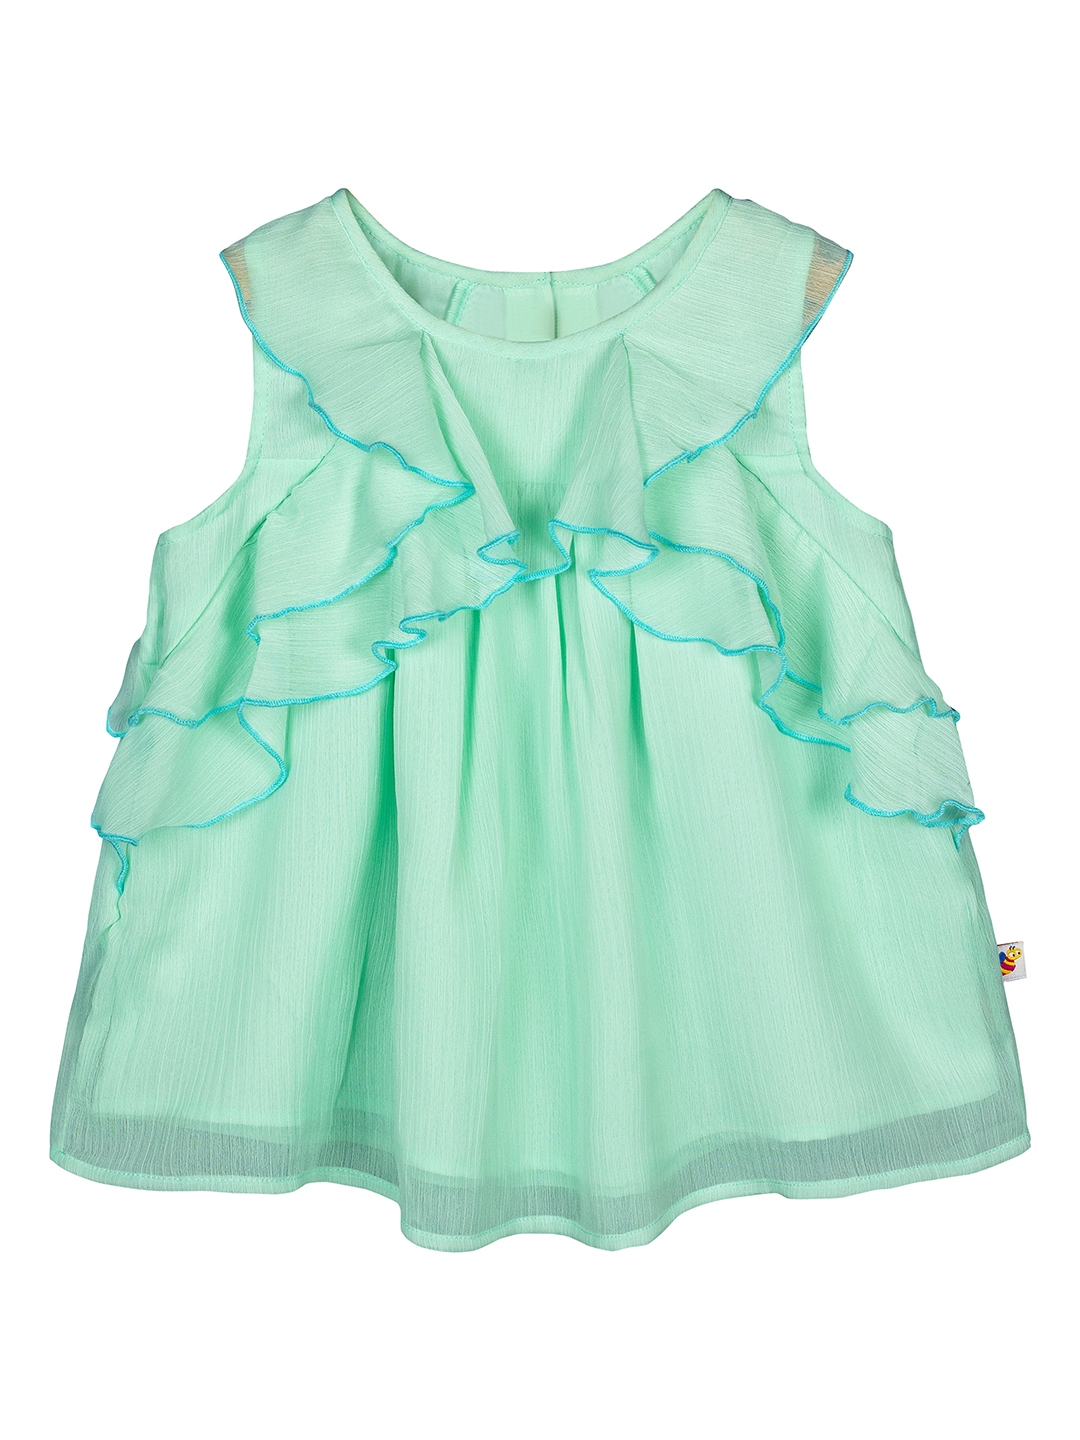 Budding Bees | Green Solid Top